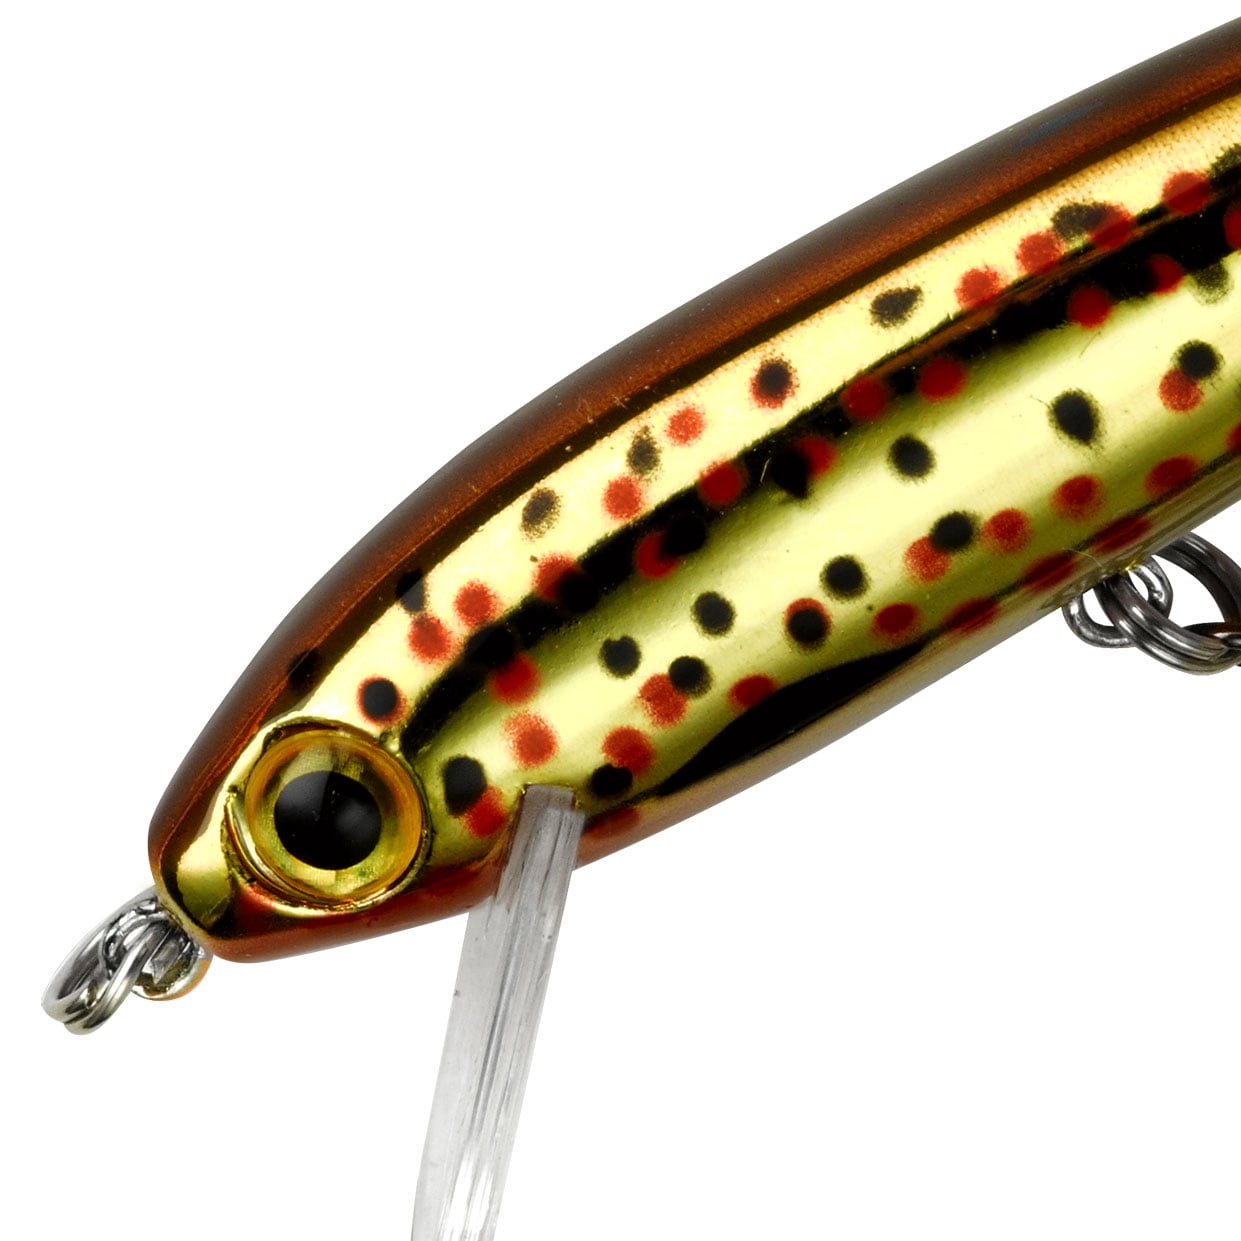 Neuse River Bait & Tackle - Ugly Duckling 27MR in stock! This thing is a  trout catching machine! Only at Neuse River Bait and Tackle! .  #custommirrolure #mirrolure #uglyduckling #trout #speckledtrout  #troutfishing #